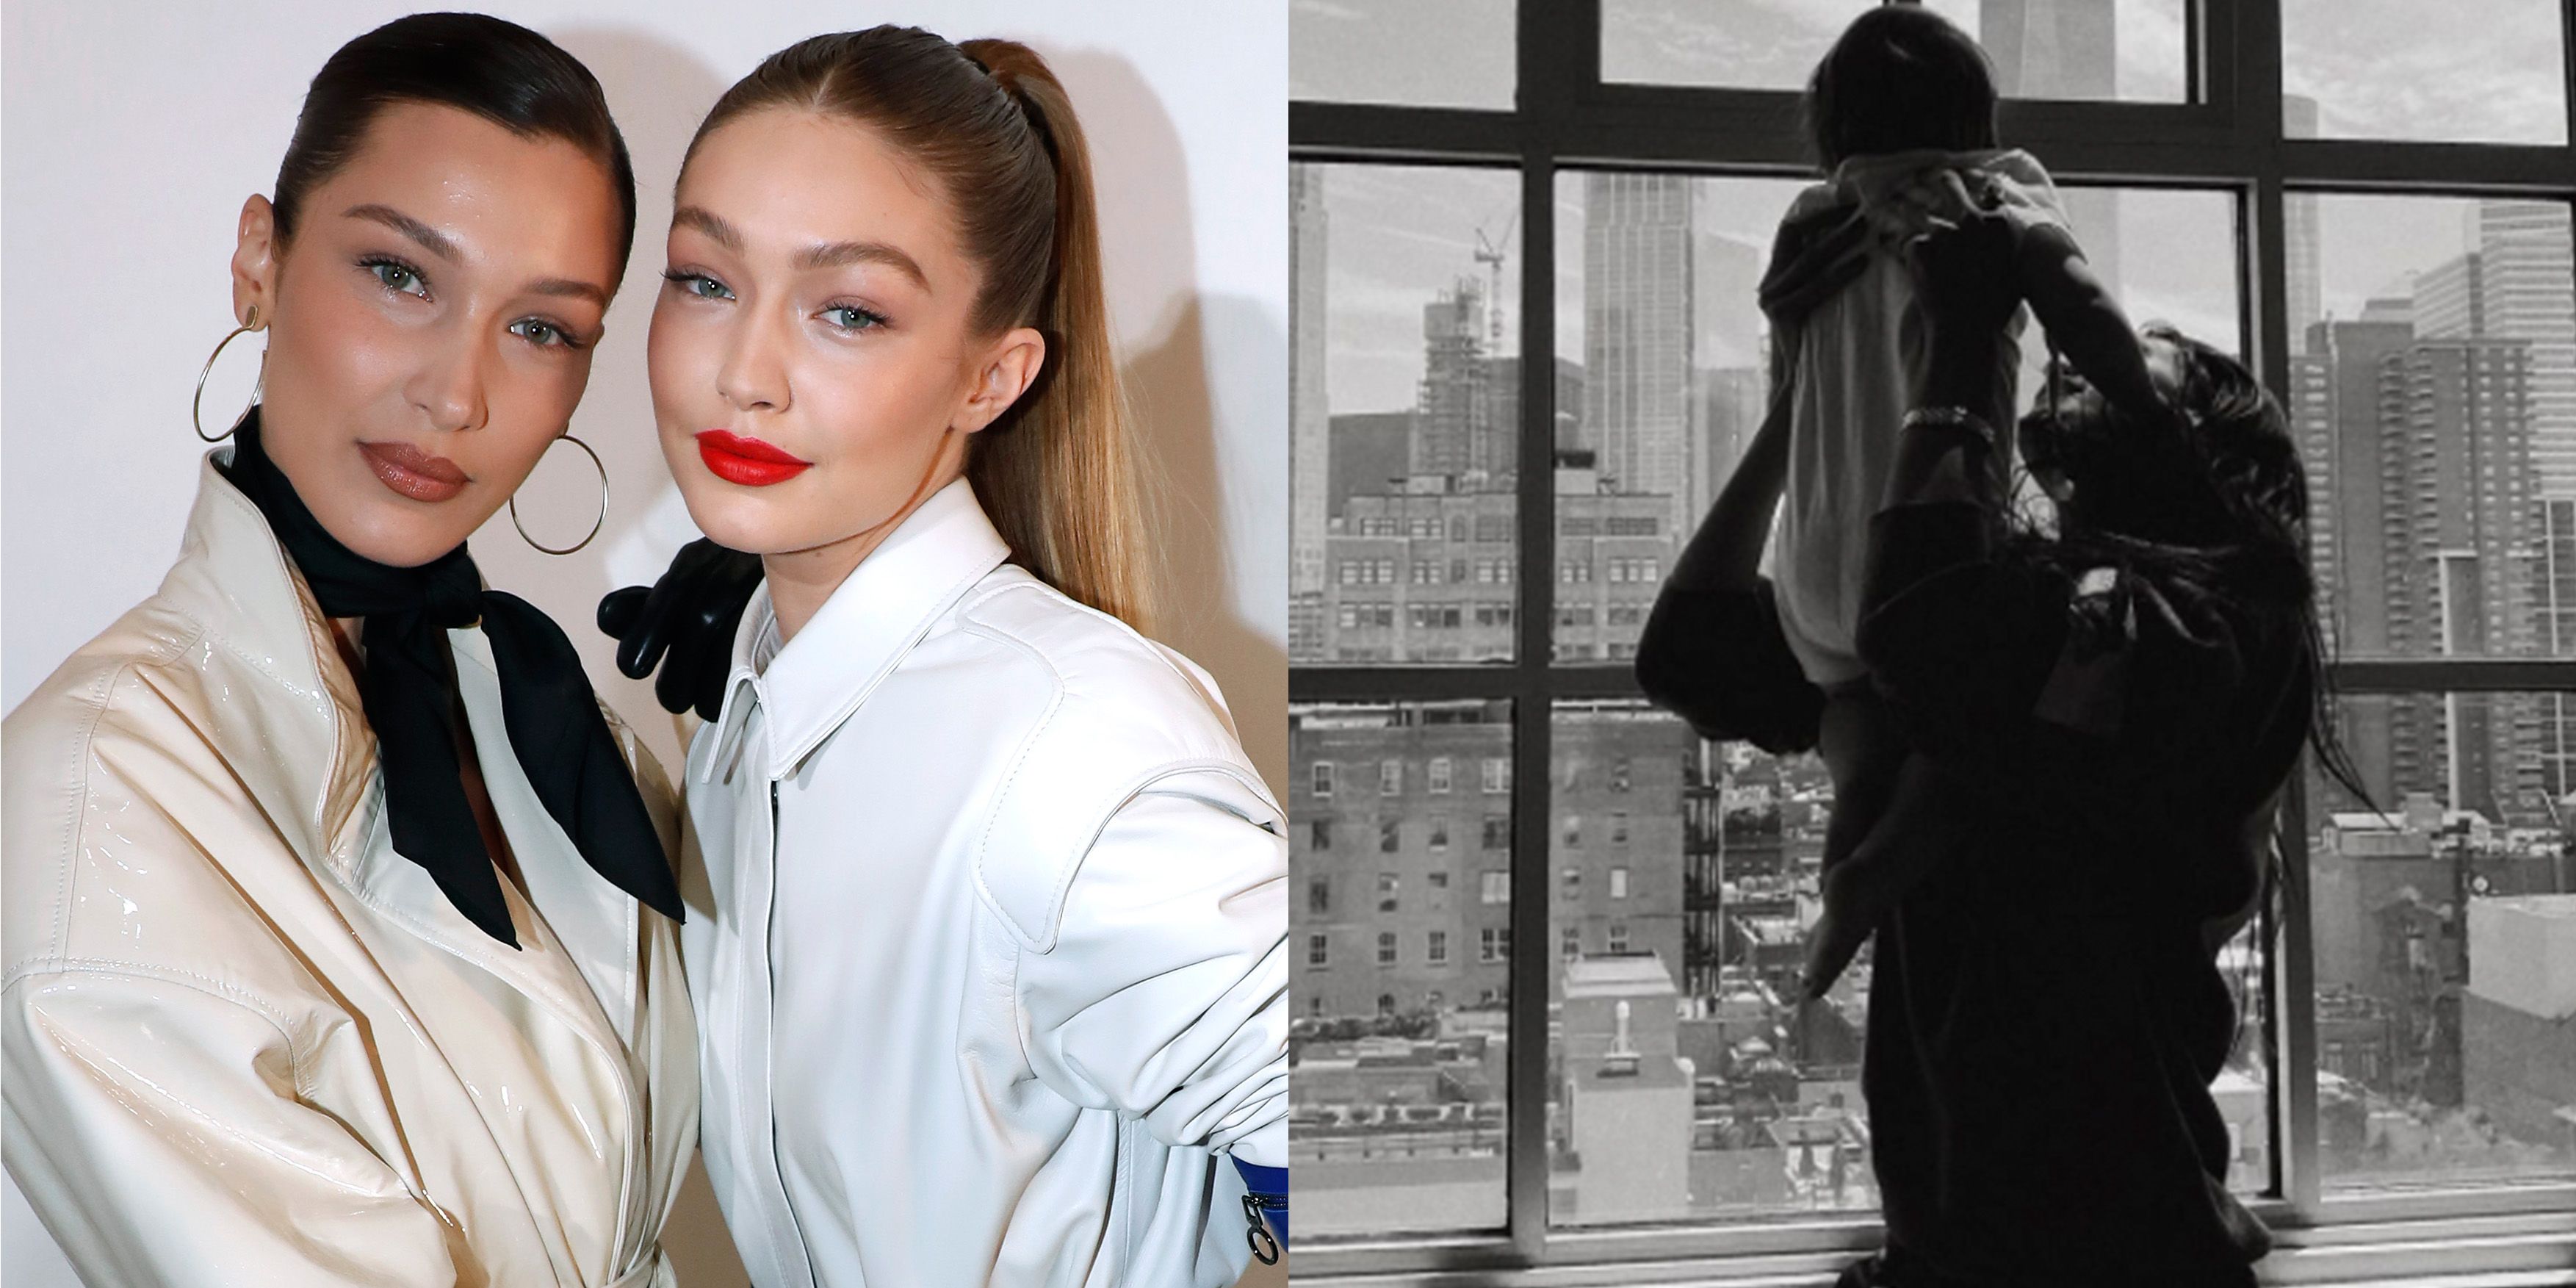 Gigi Hadid Just Shared the First Photo of Baby Khai and Bella Hadid Together